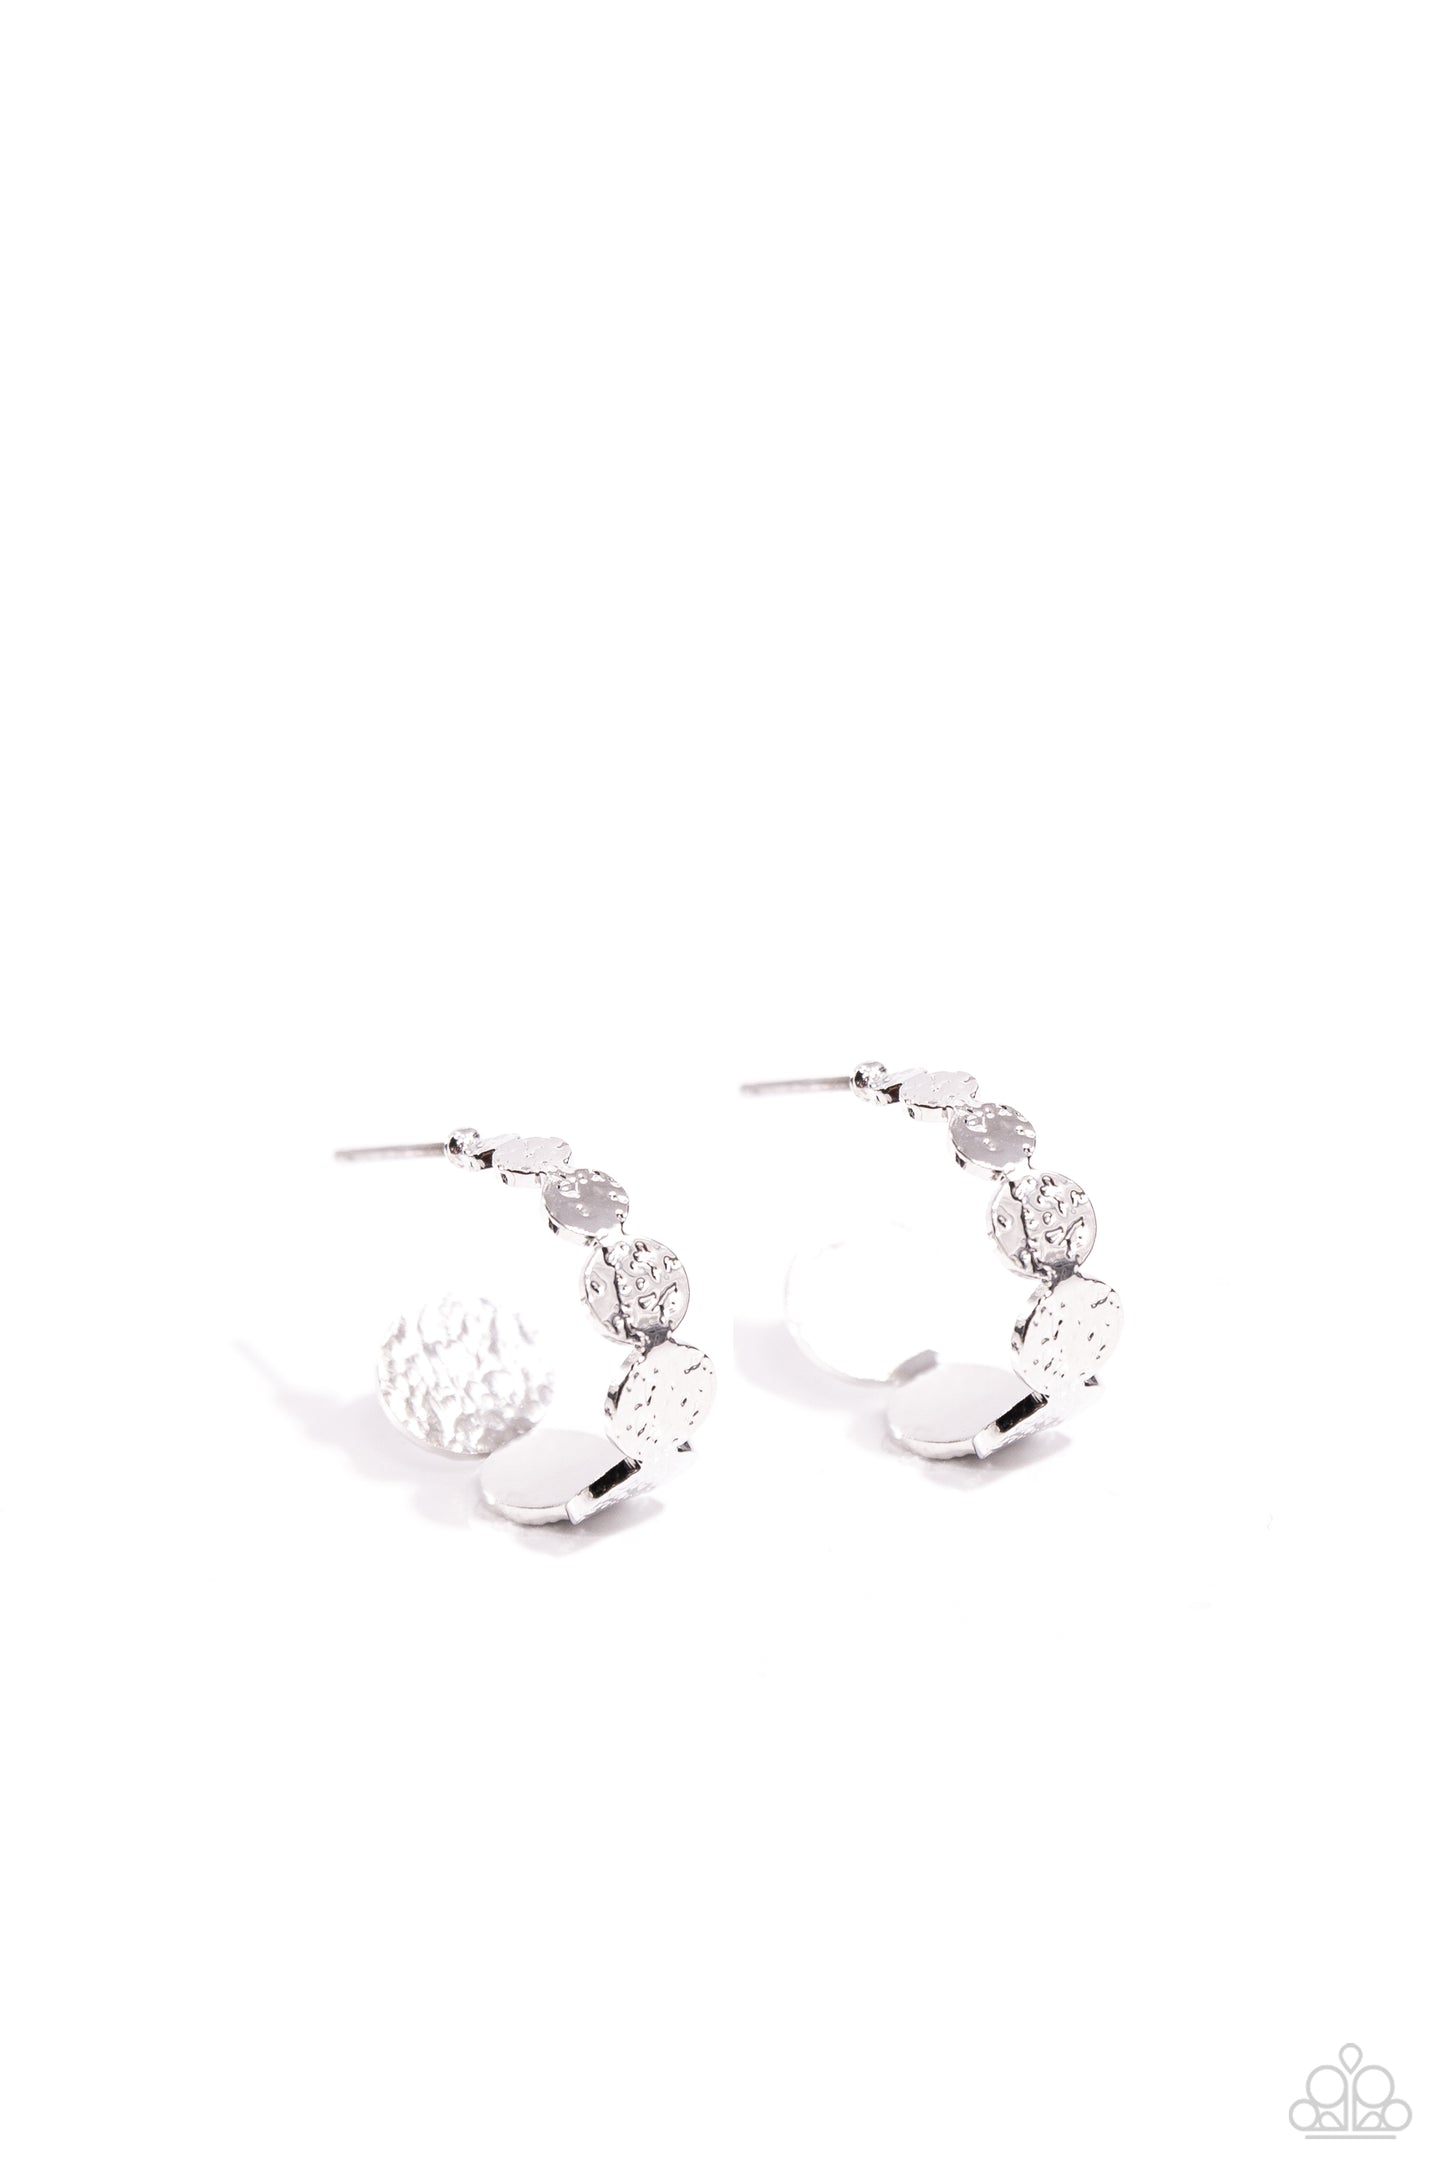 Textured Tease - silver - Paparazzi earrings